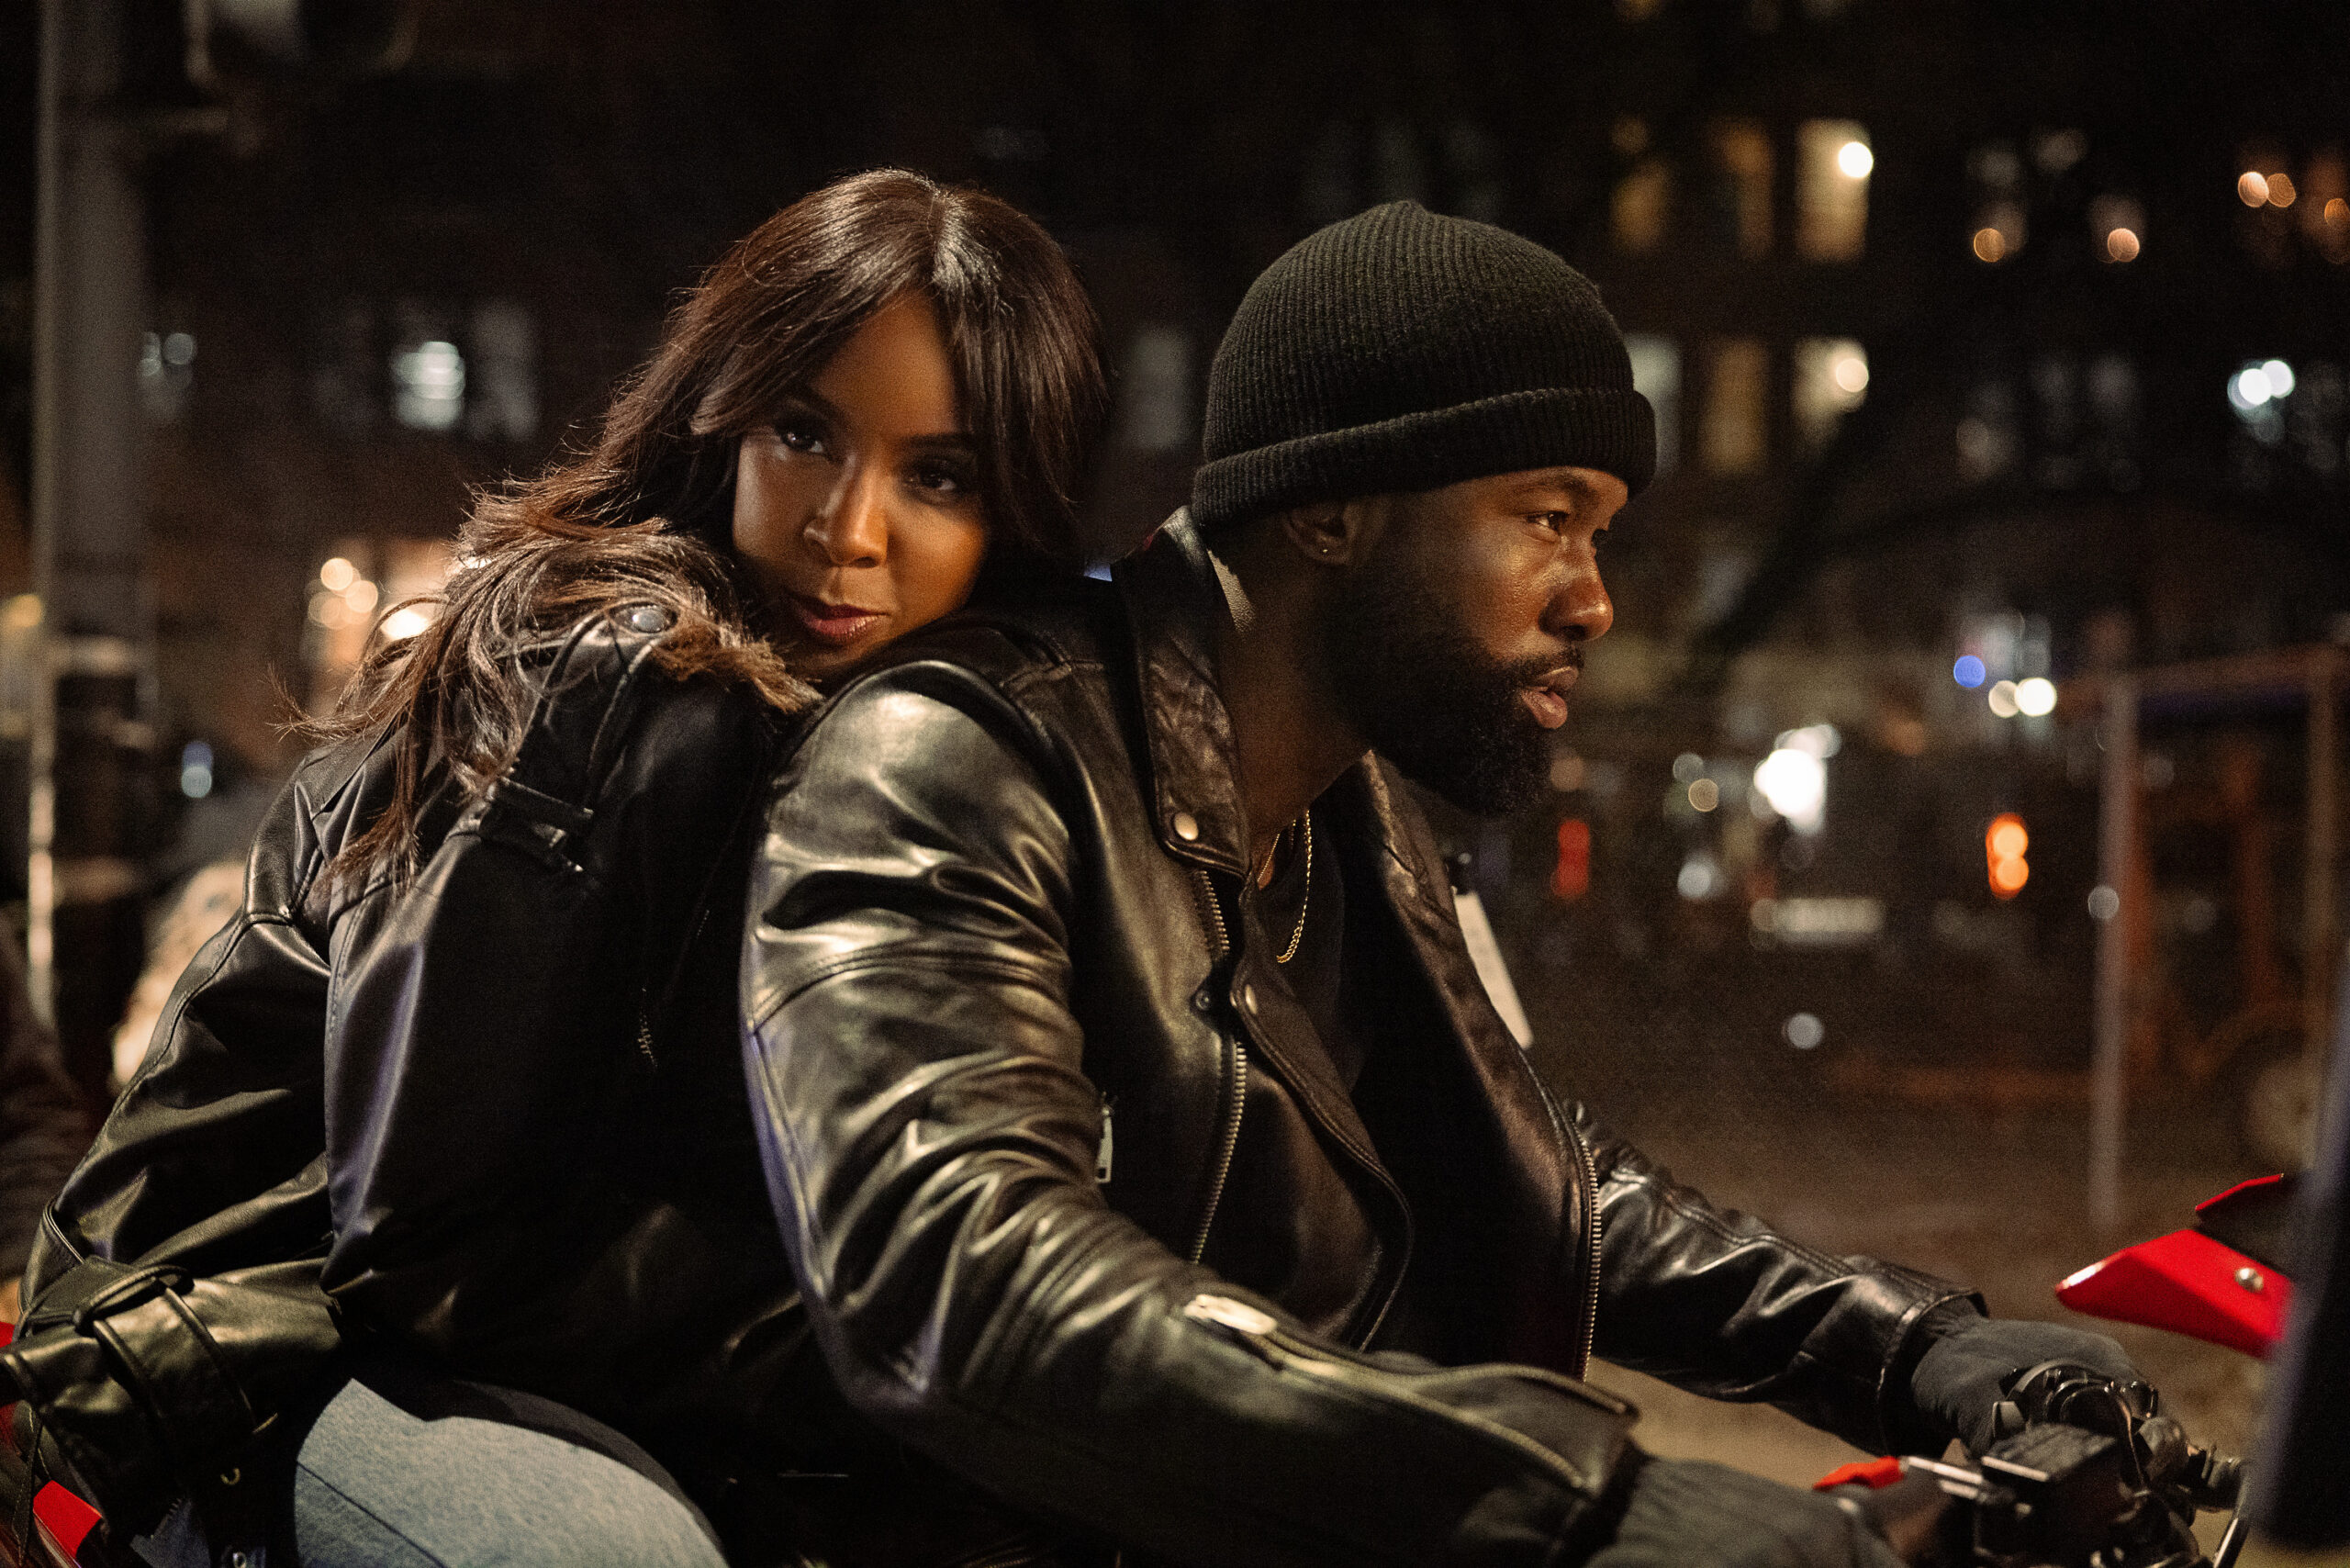 'Mea Culpa' Stars Kelly Rowland And Trevante Rhodes See The Film As A Way To Flex Their Creative Muscle